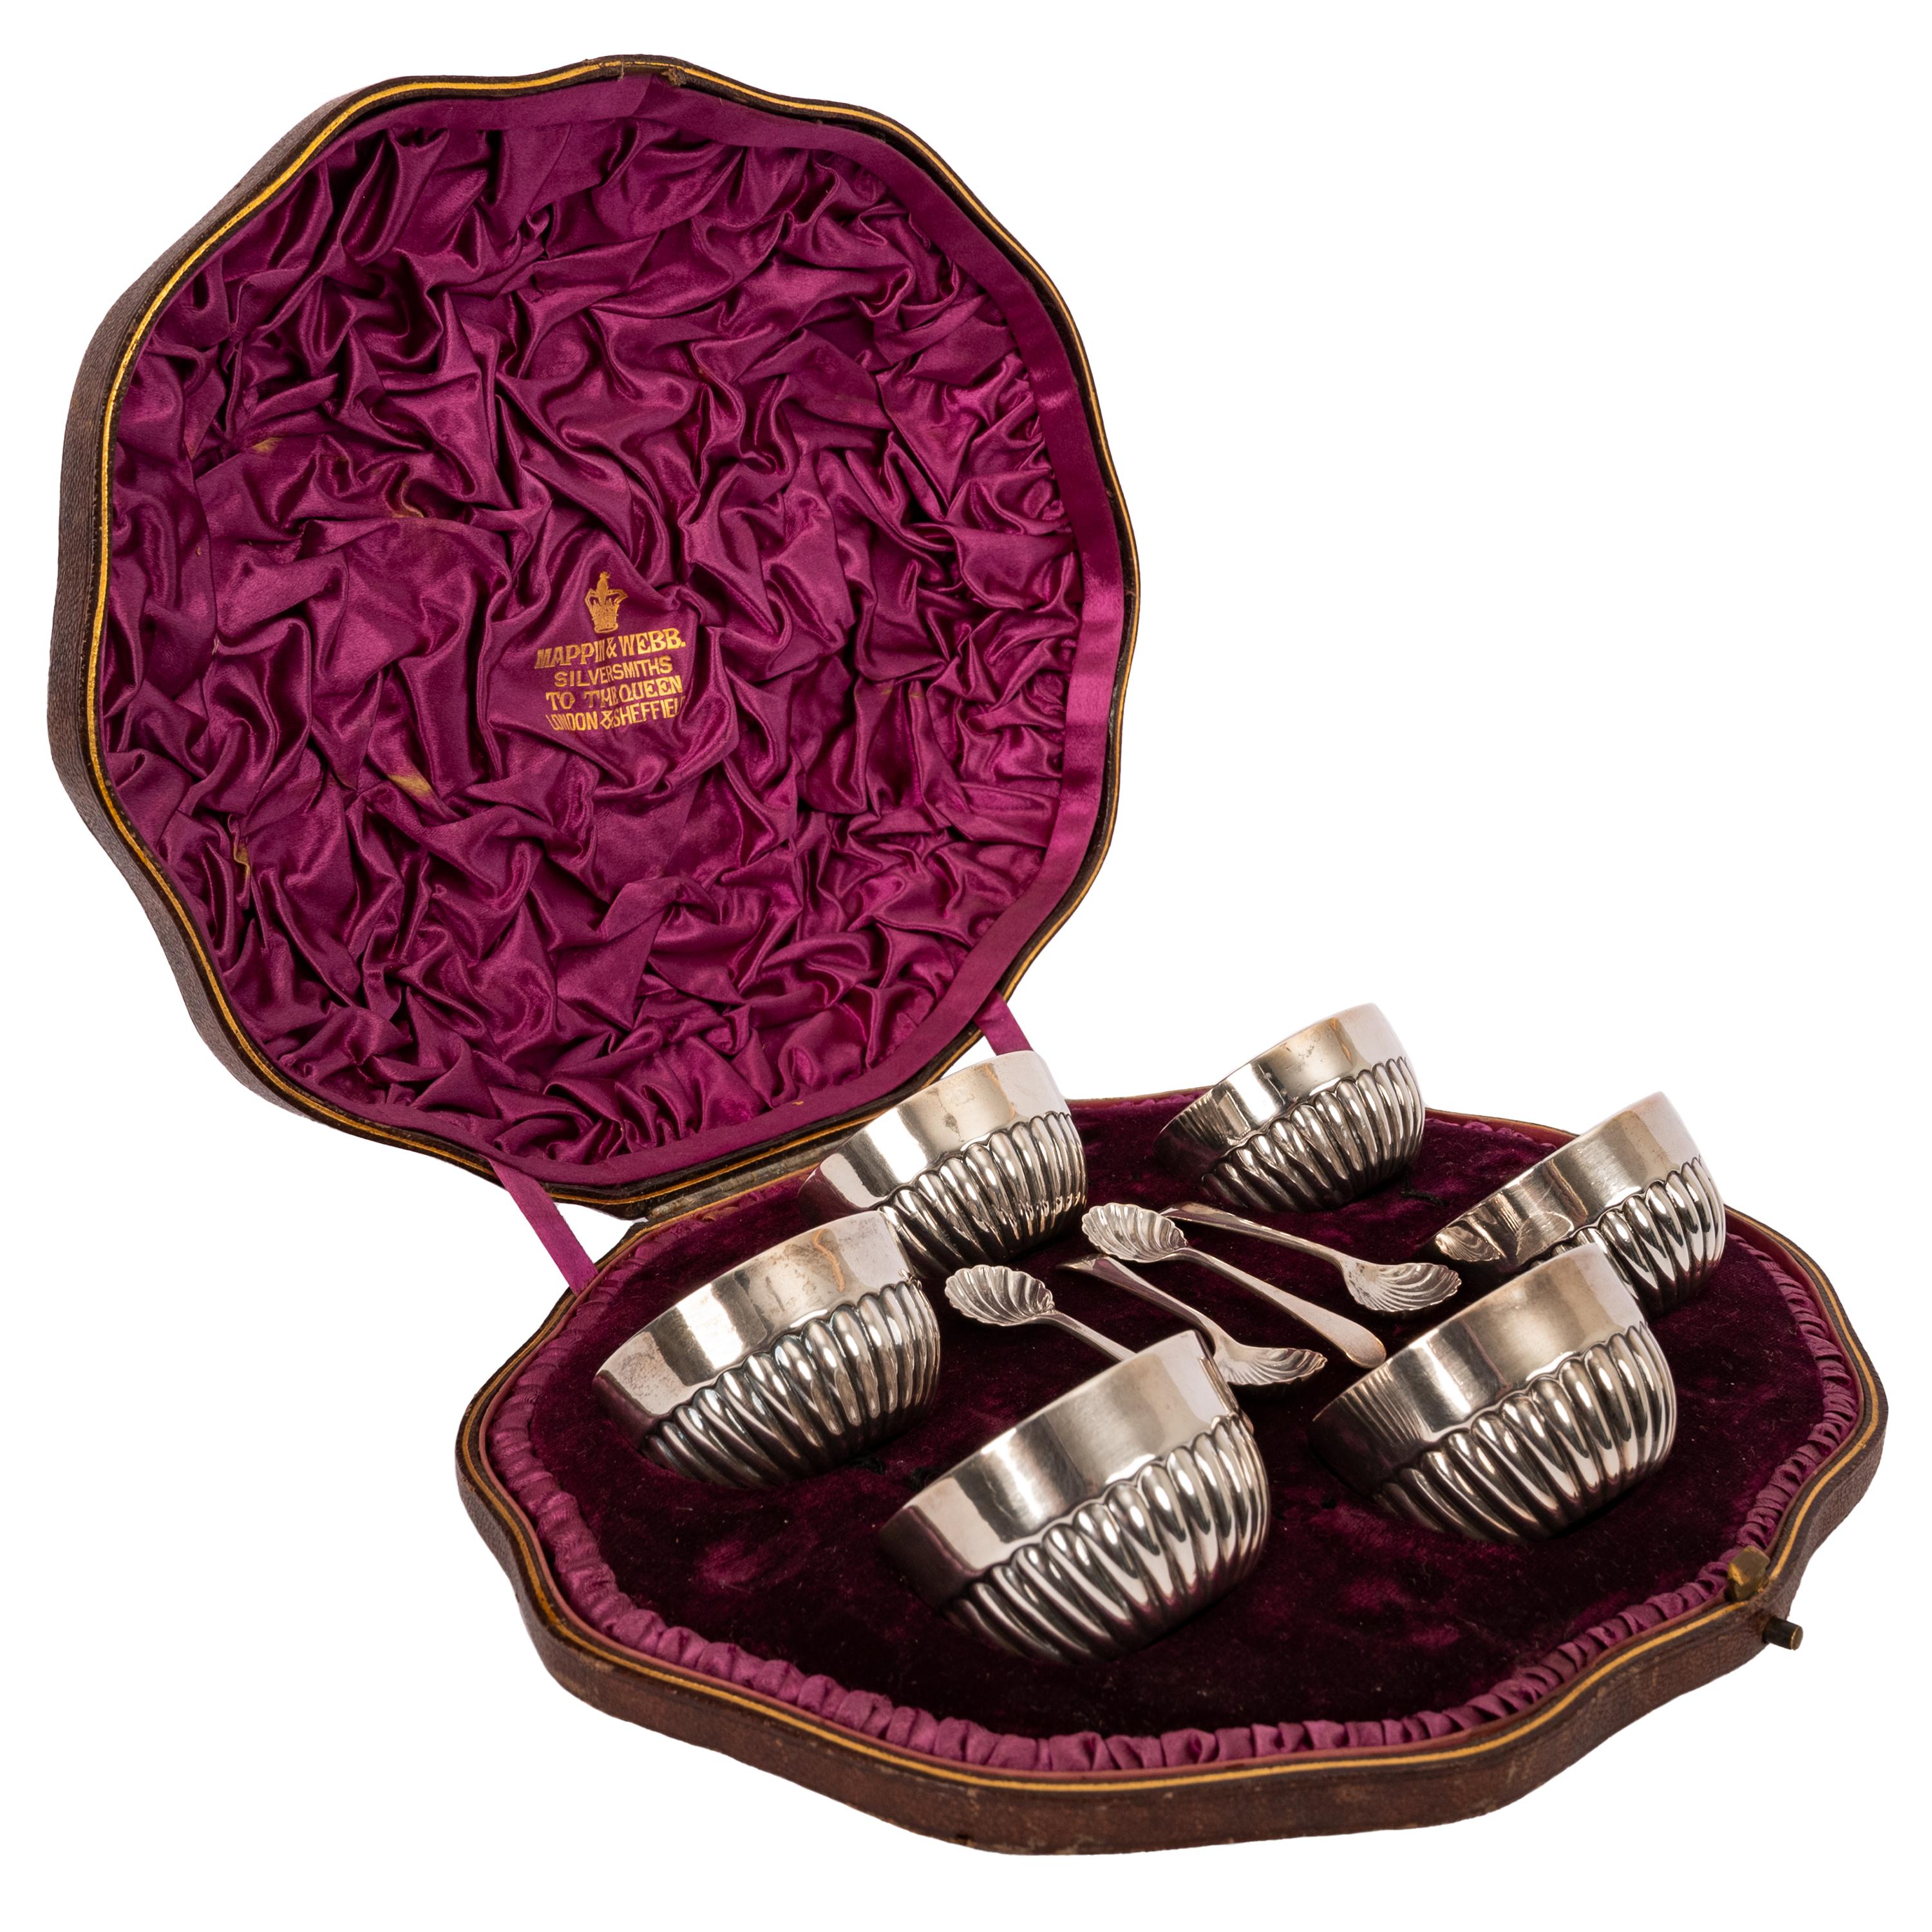 A good antique set of sterling silver salts and spoons, Mappin & Webb, Sheffield 1886.
Housed in the original hard leather case, containing six circular ribbed salts and four matching spoons. Each salt is stamped with the date letter for 1886 and